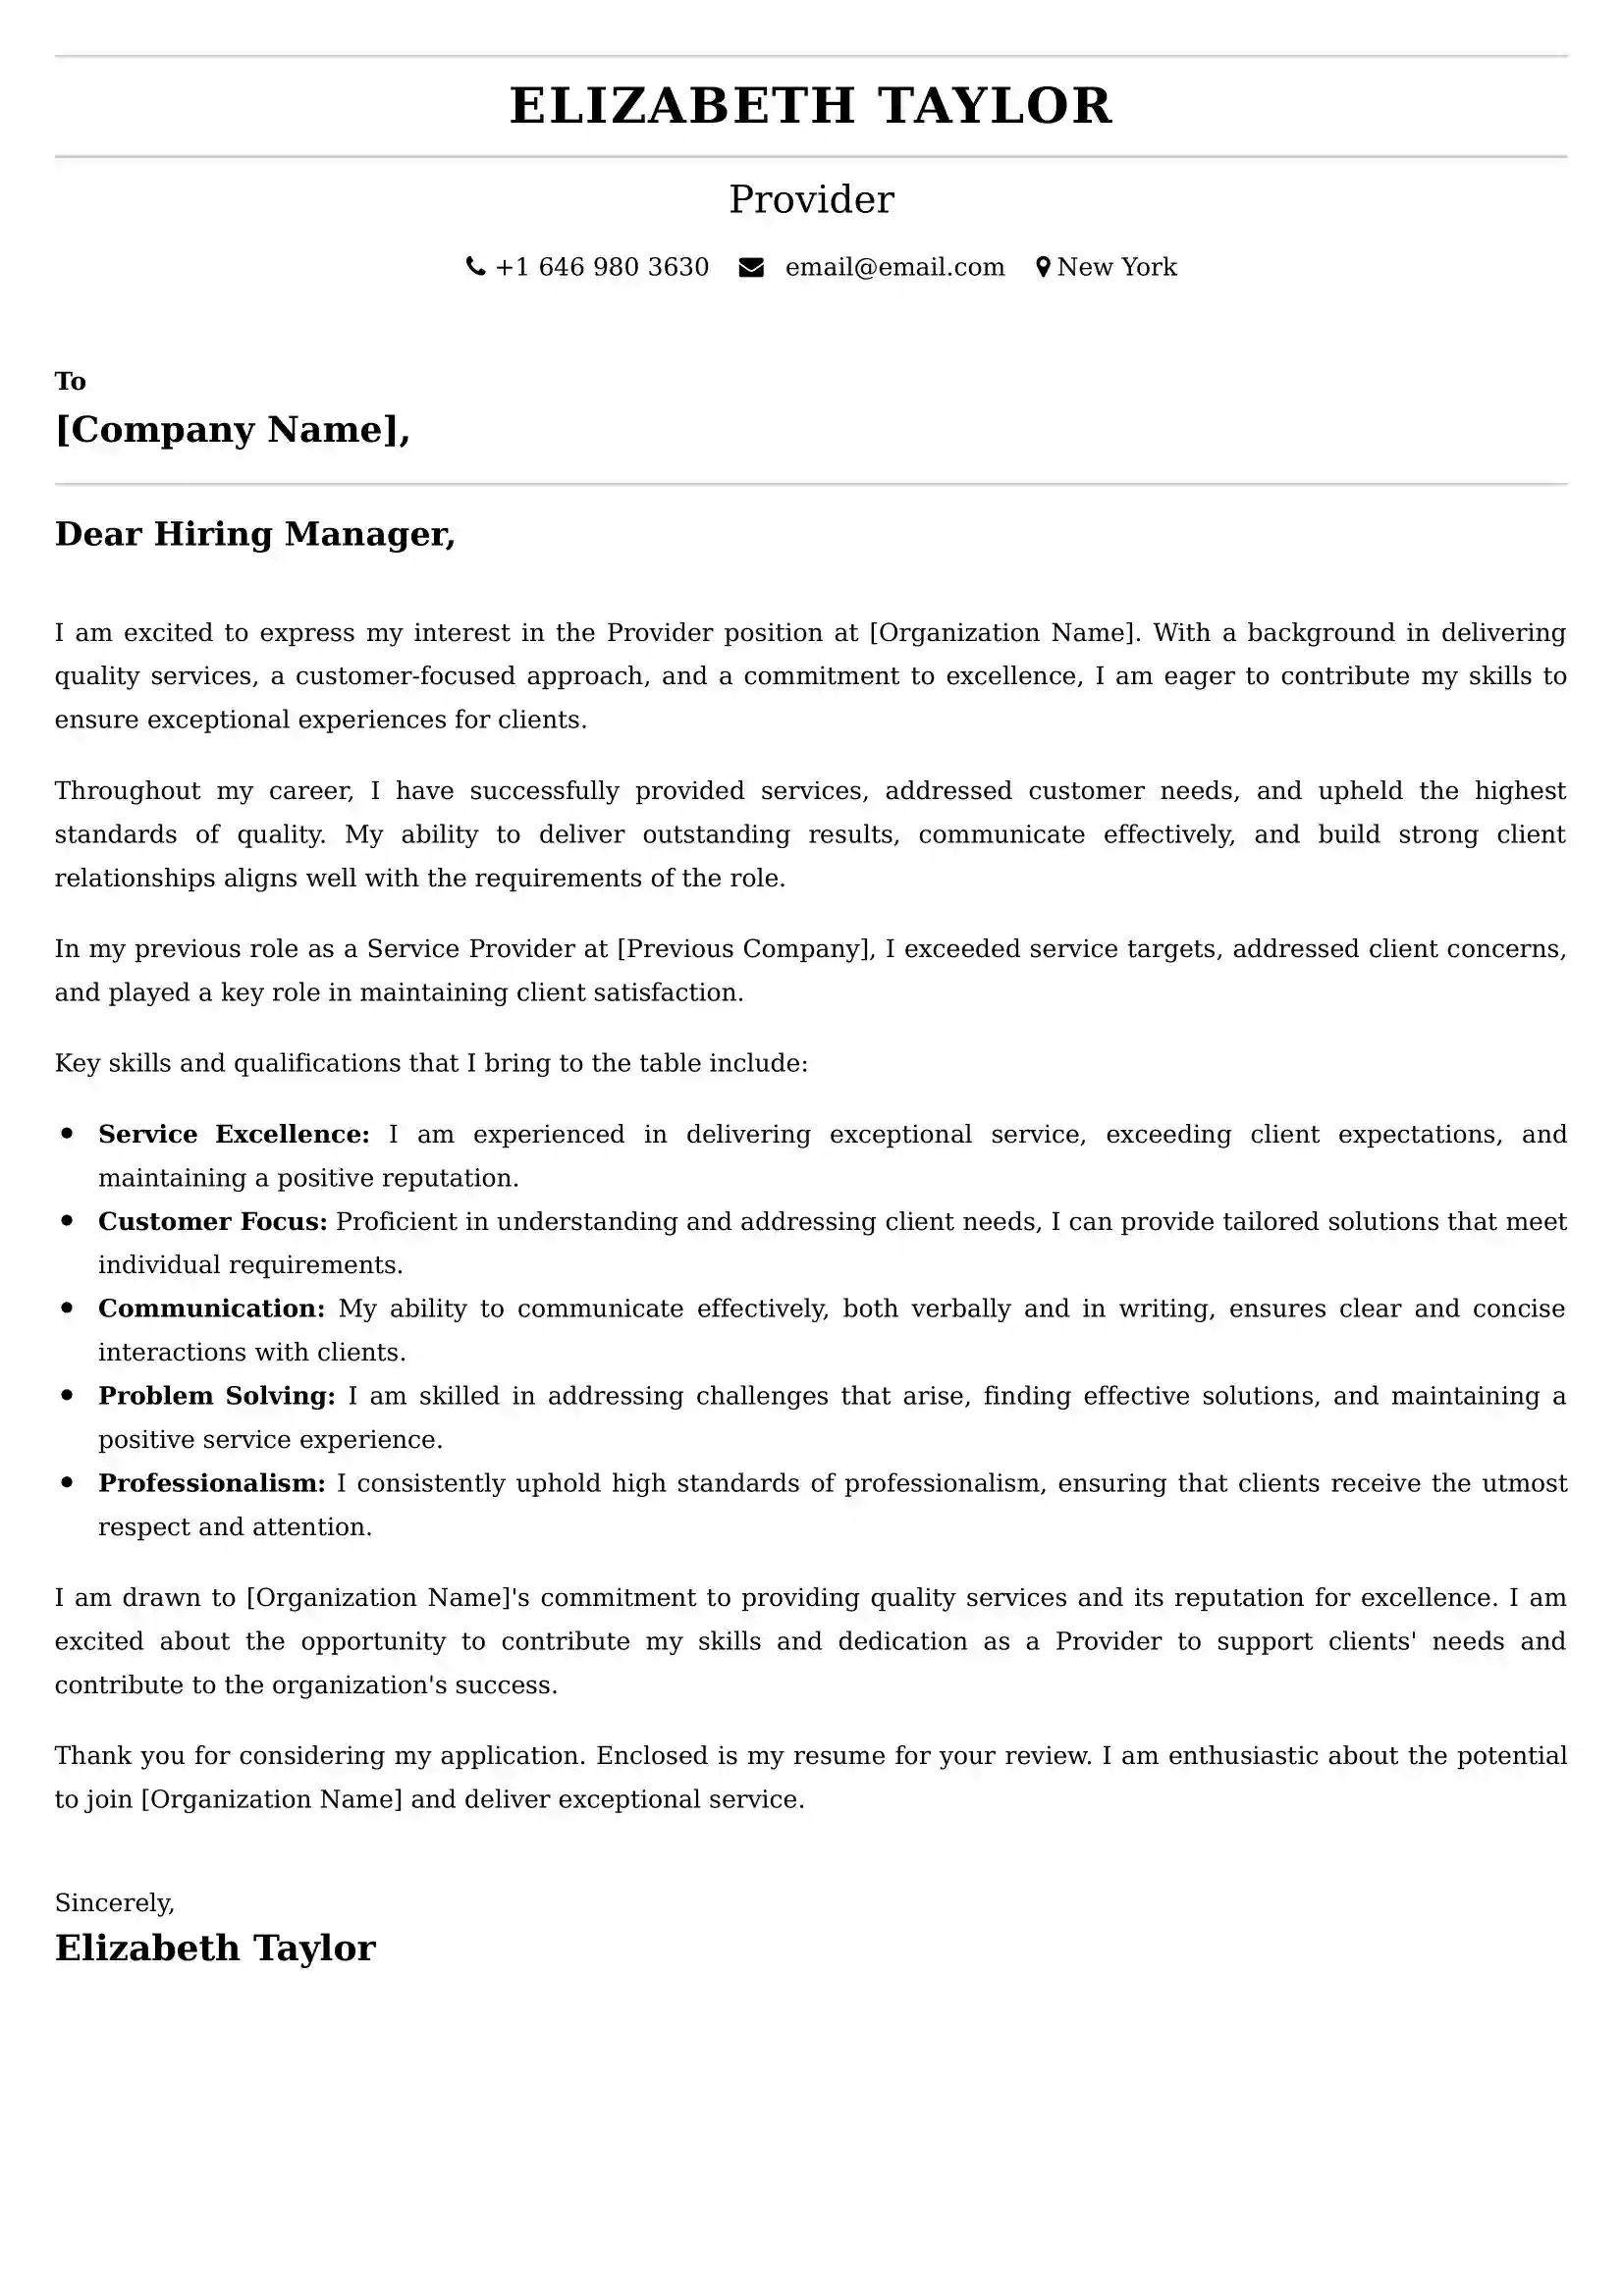 Provider Cover Letter Examples for UK 